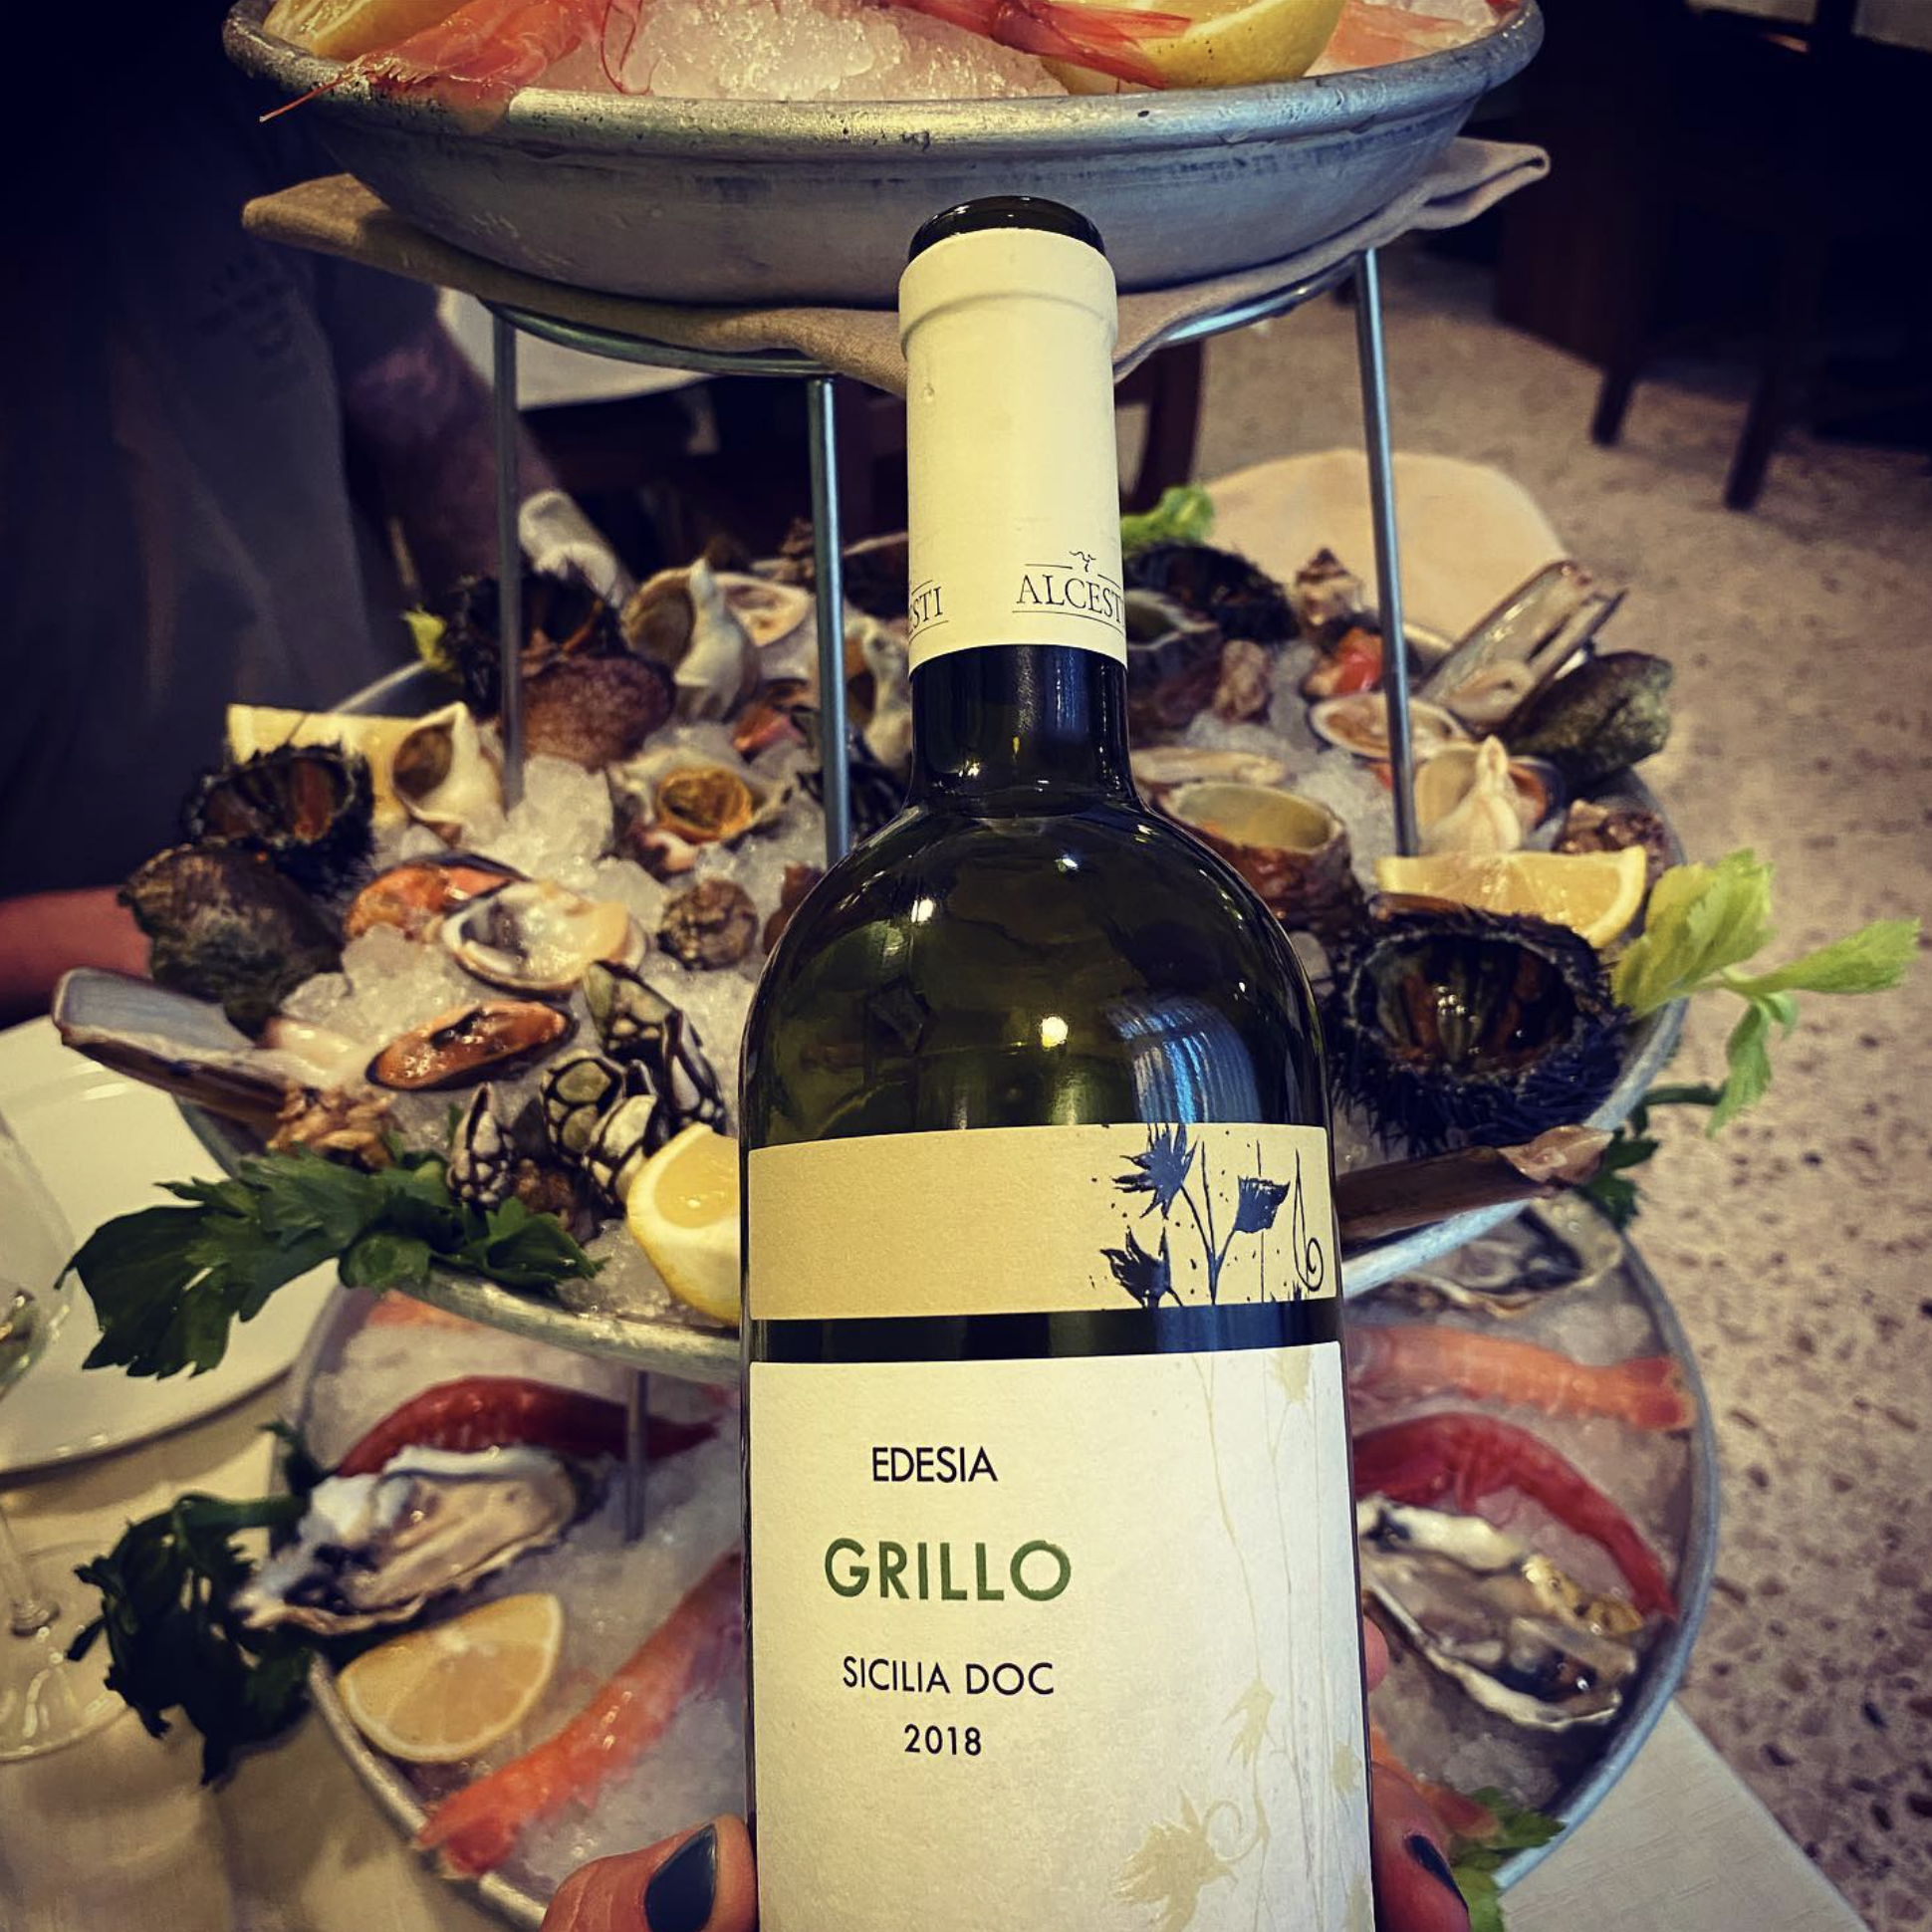 A Sicilian wine pairing for seafood – Grillo